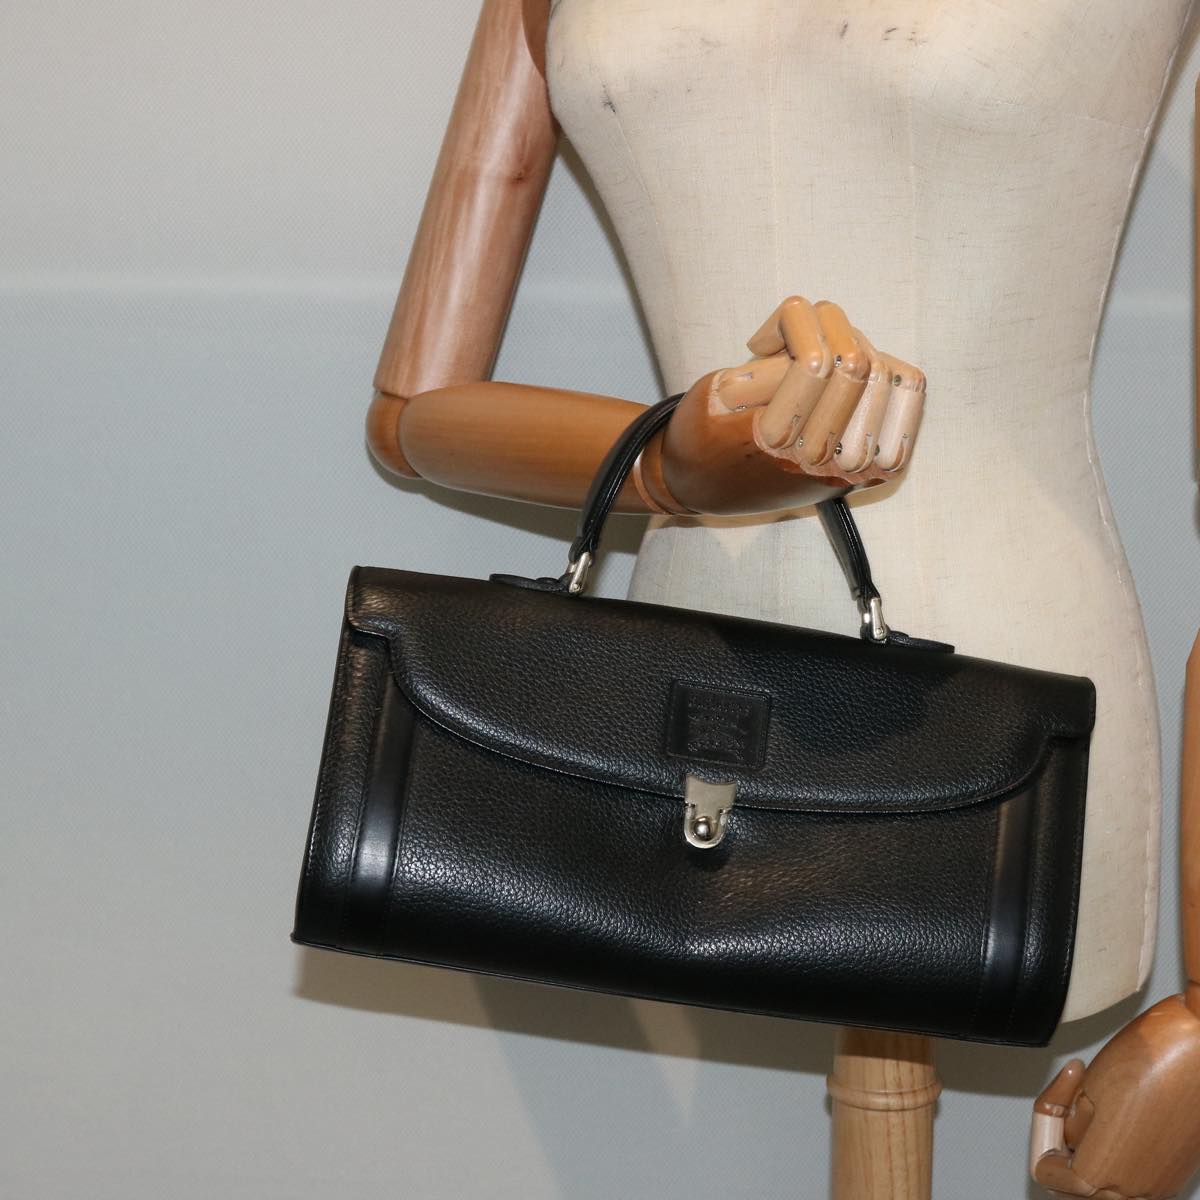 Burberrys Hand Bag Leather Black Auth bs13979